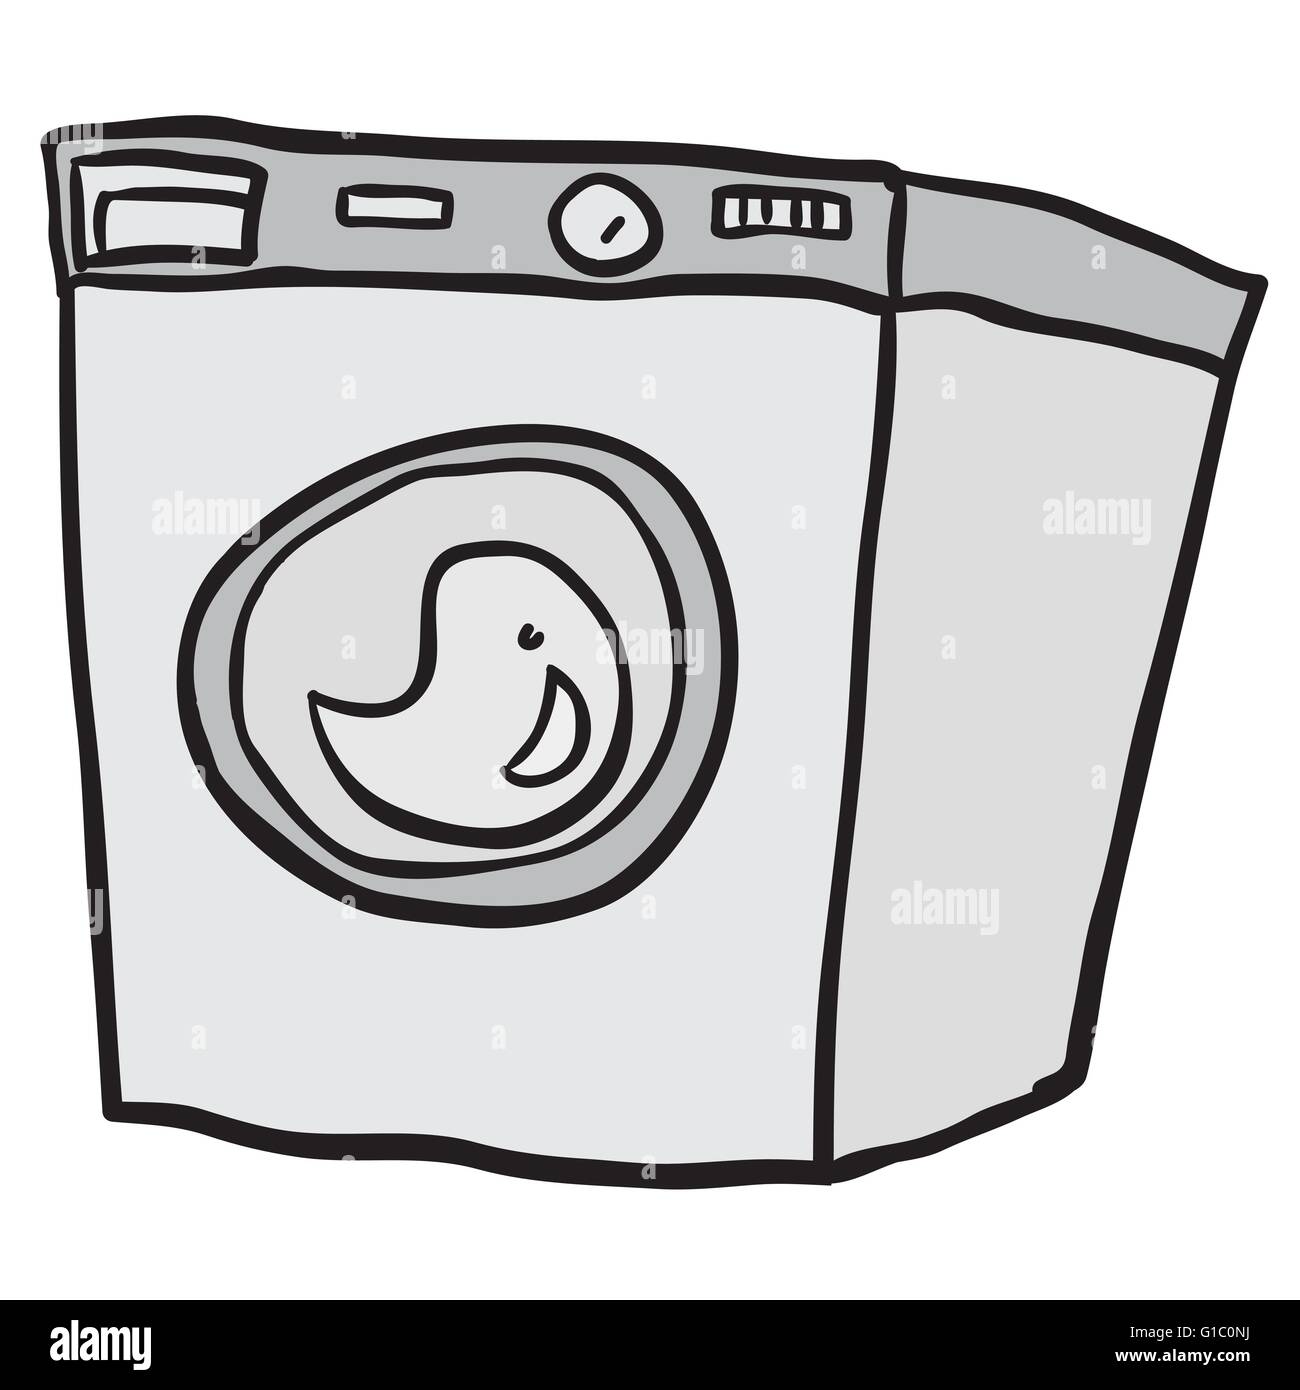 How to draw a Washing Machine step by step - YouTube